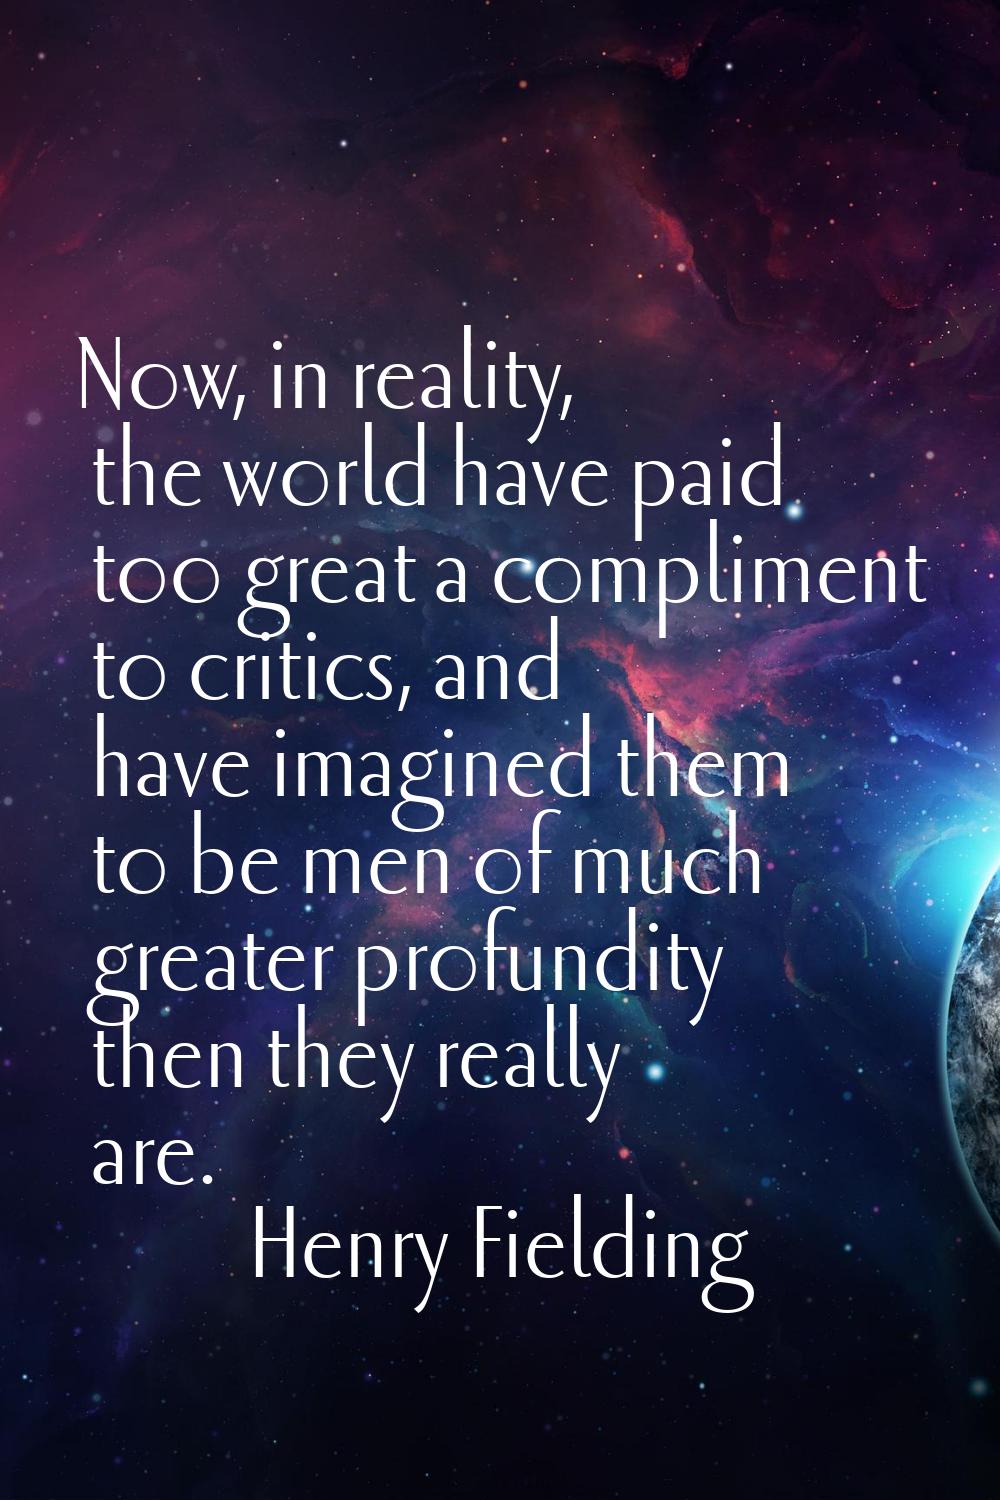 Now, in reality, the world have paid too great a compliment to critics, and have imagined them to b